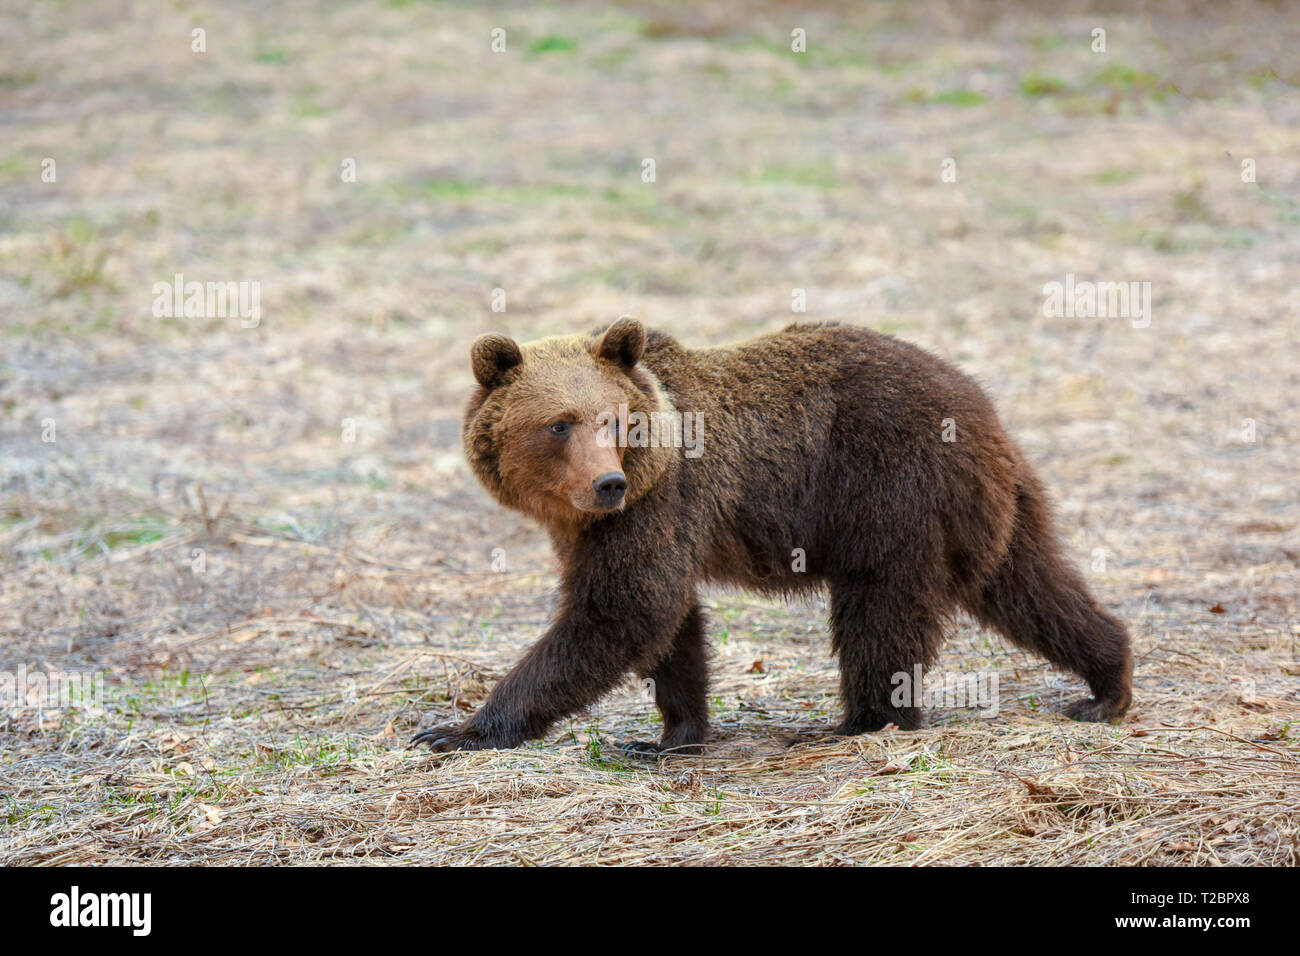 Wild brown bear in Bieszczady mountains, Poland. Huge Carpathian bear woke up from winter hibernation and is looking for food in early spring Stock Photo